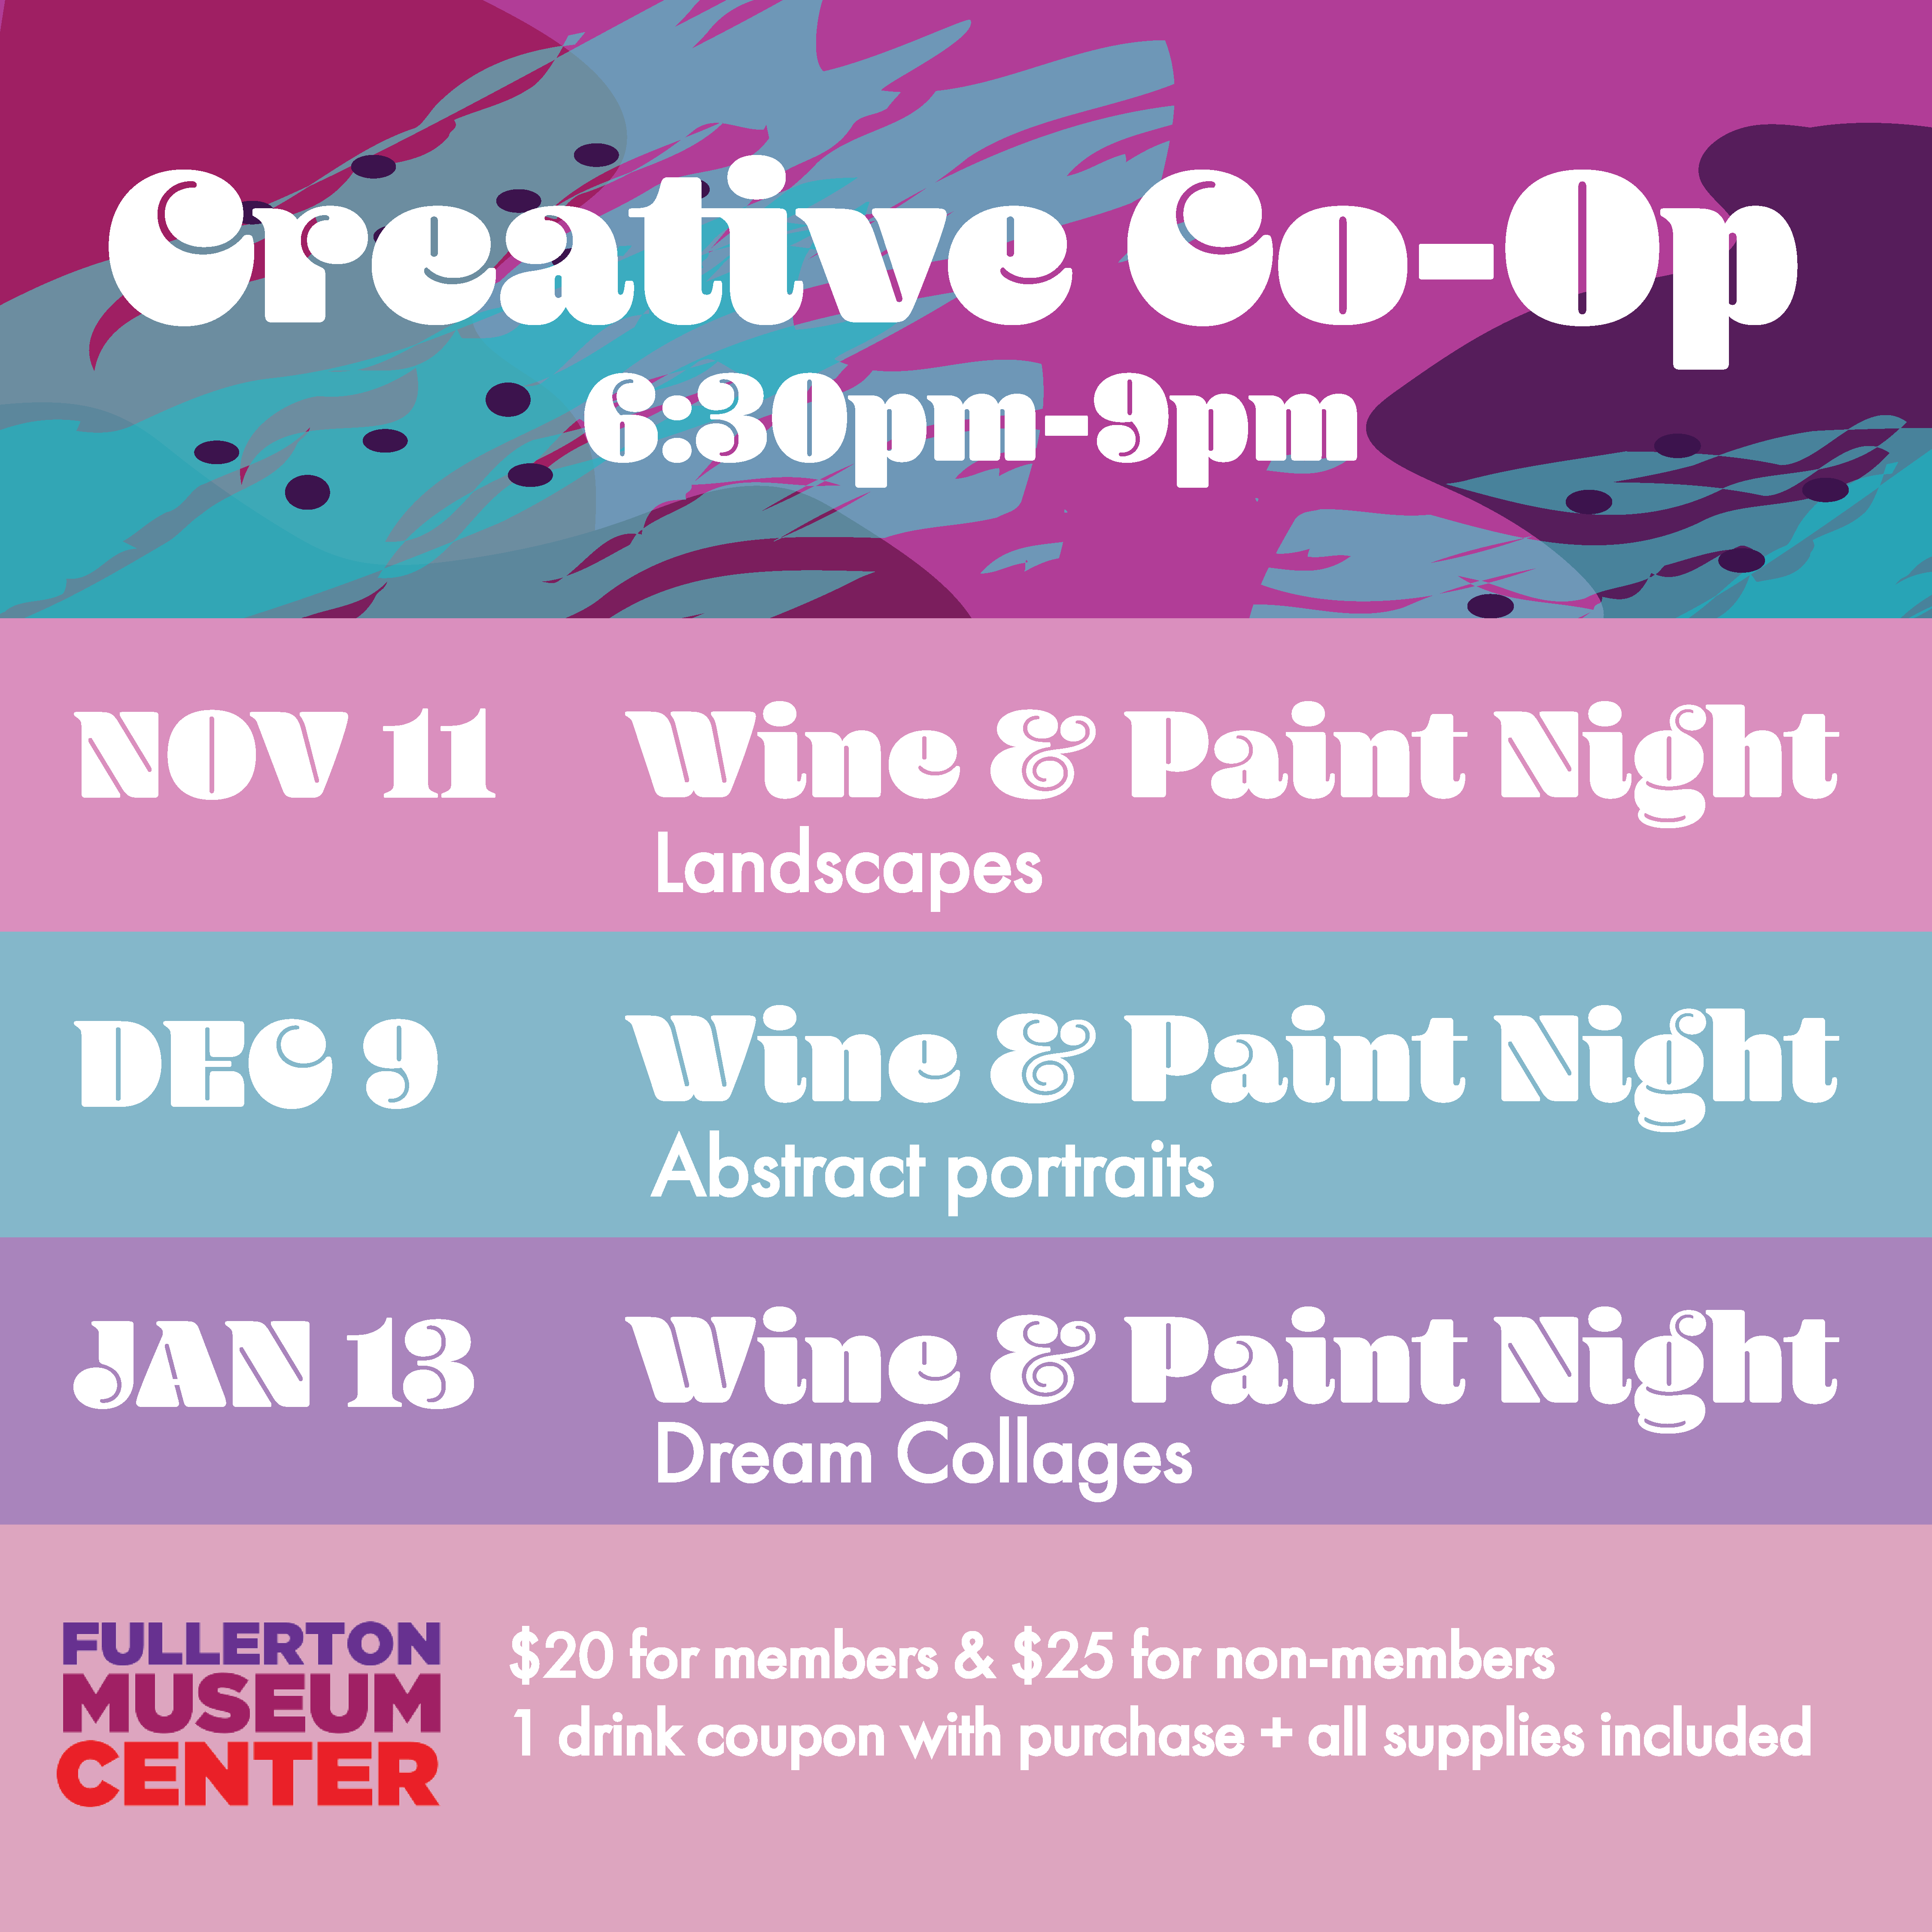 Wine & Paint Night: Abstract portraits
